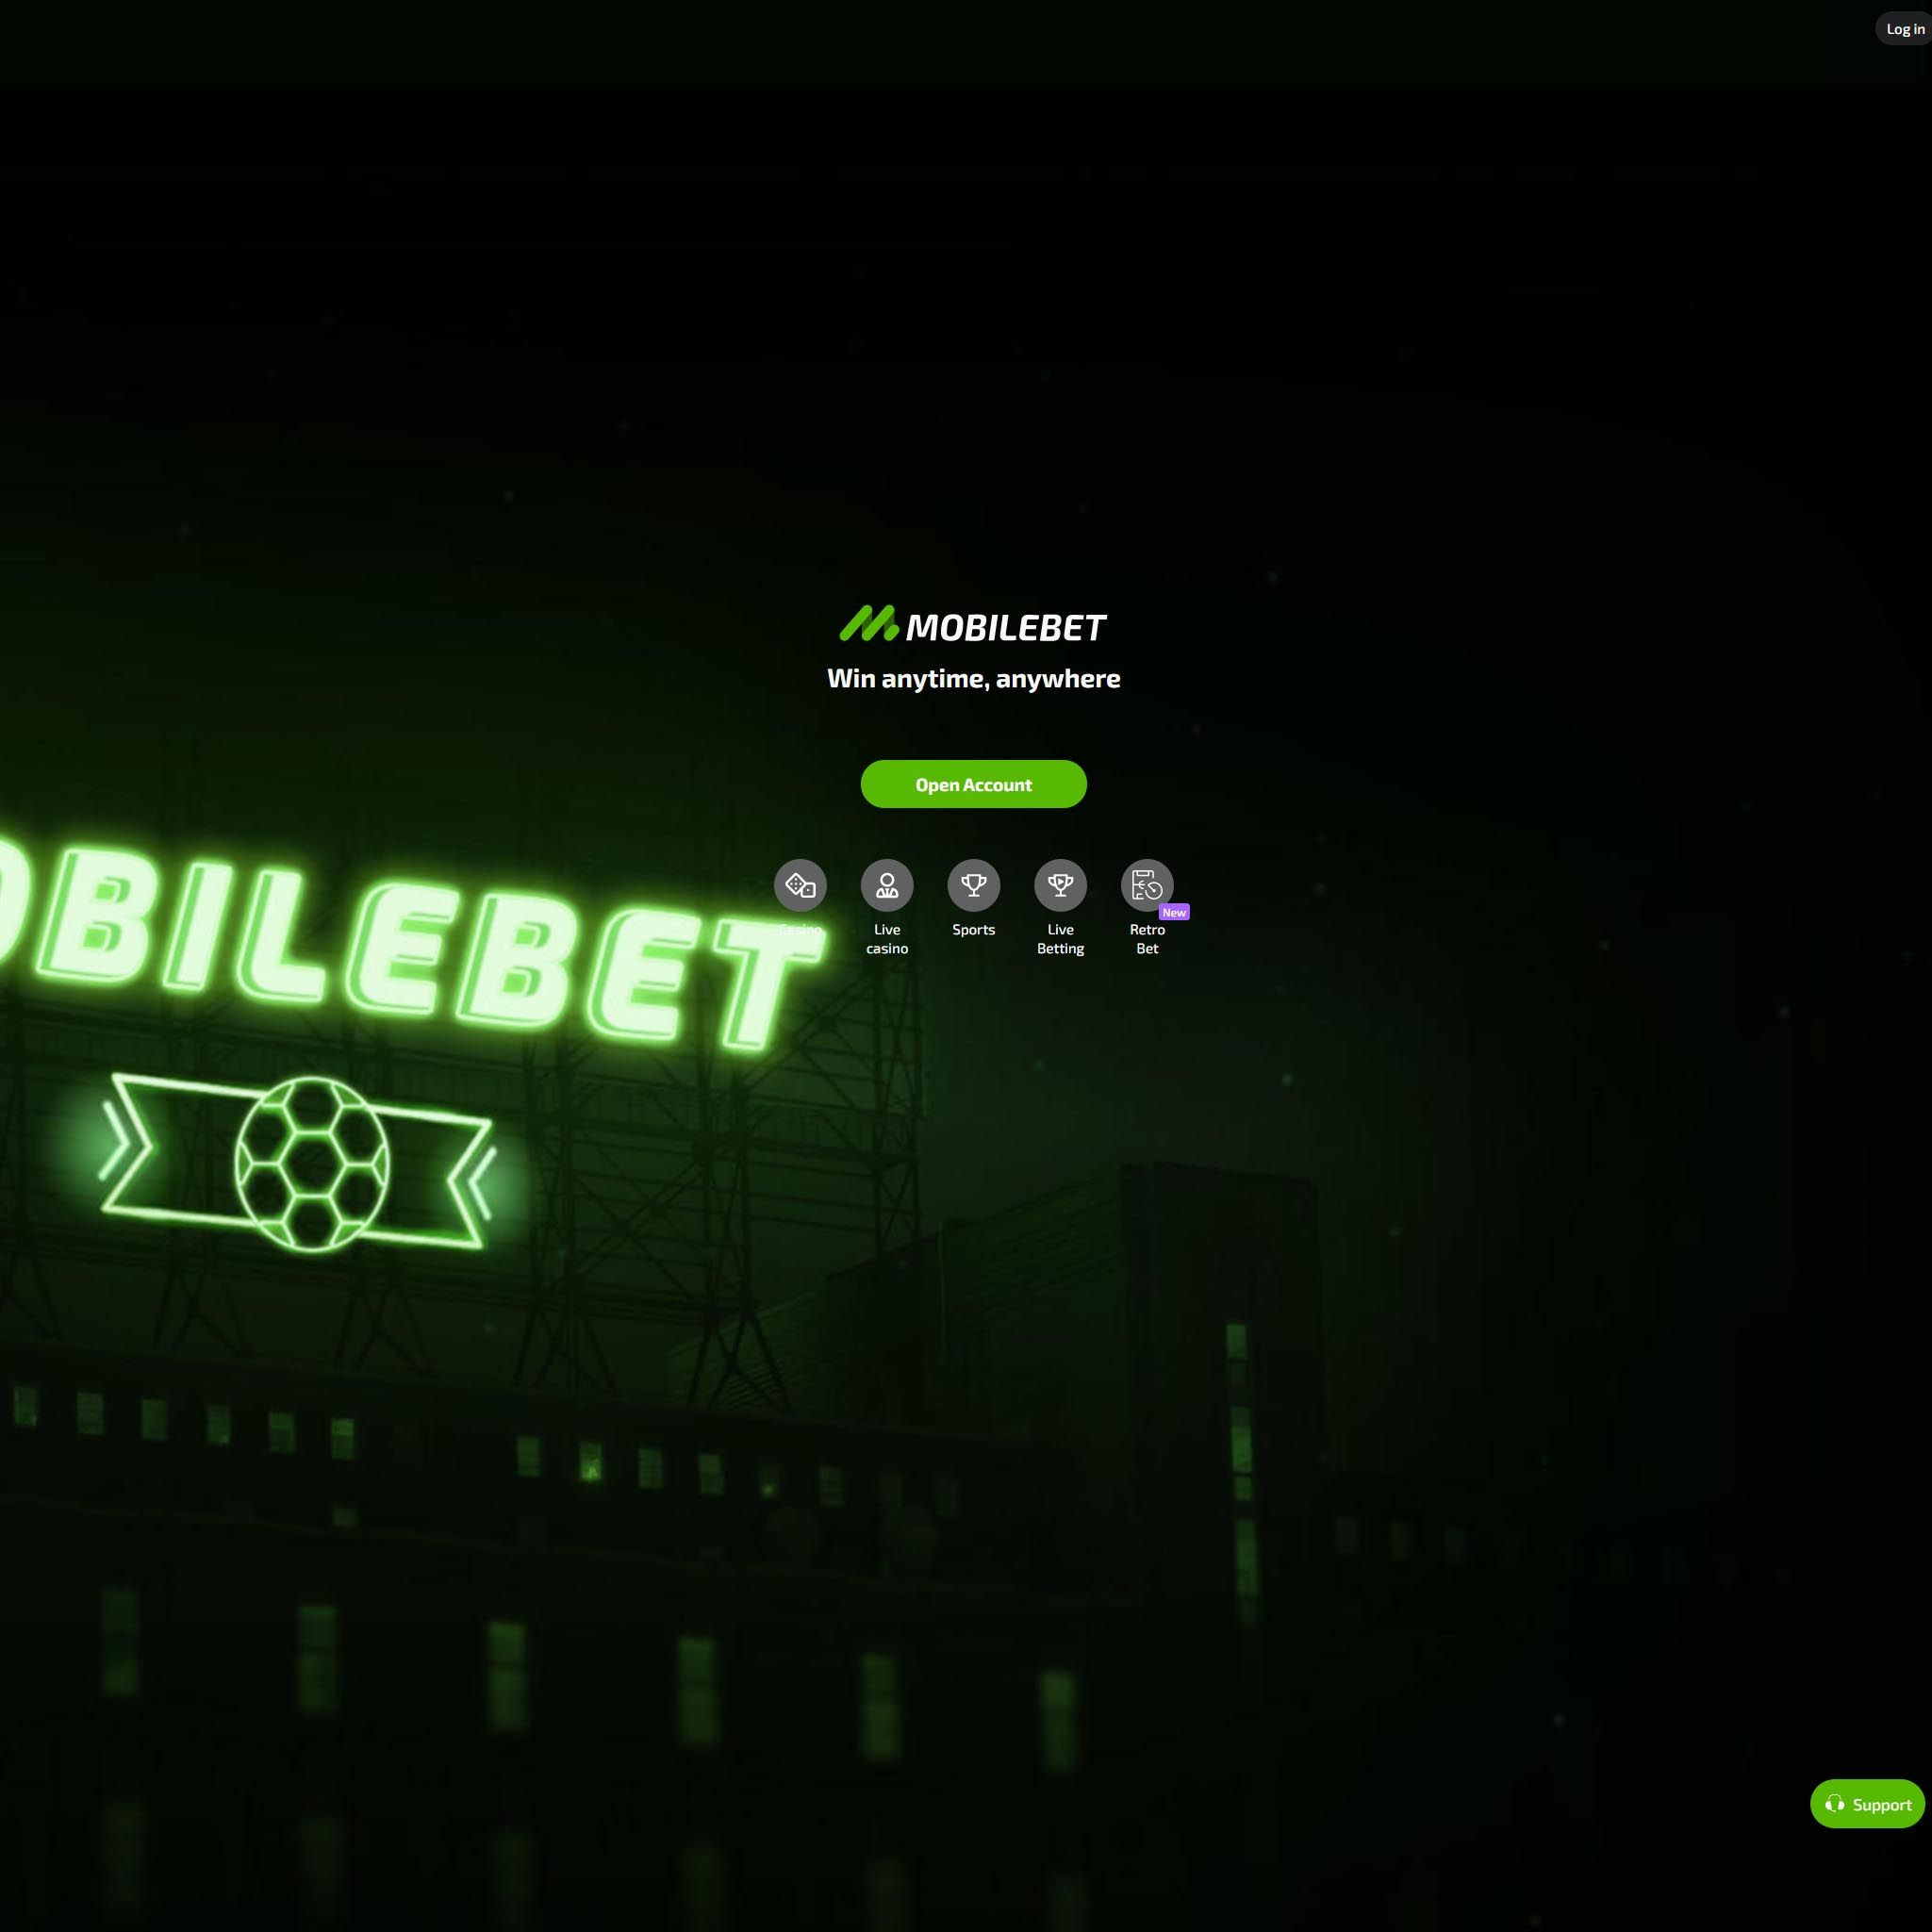 Mobilebet review by Mr. Gamble